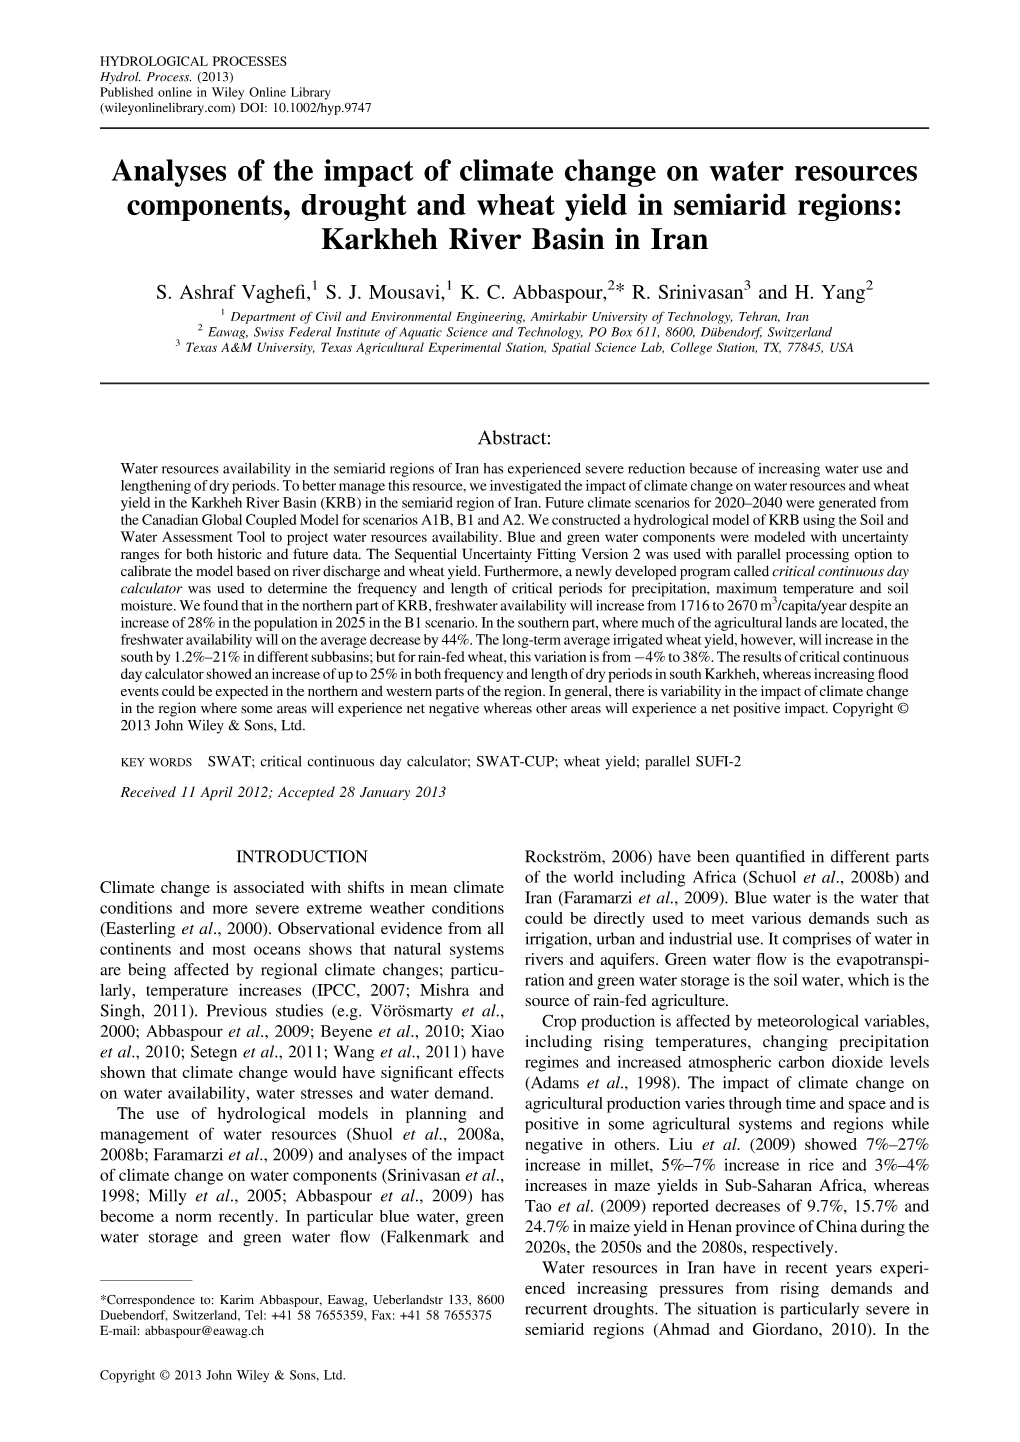 Analyses of the Impact of Climate Change on Water Resources Components, Drought and Wheat Yield in Semiarid Regions: Karkheh River Basin in Iran